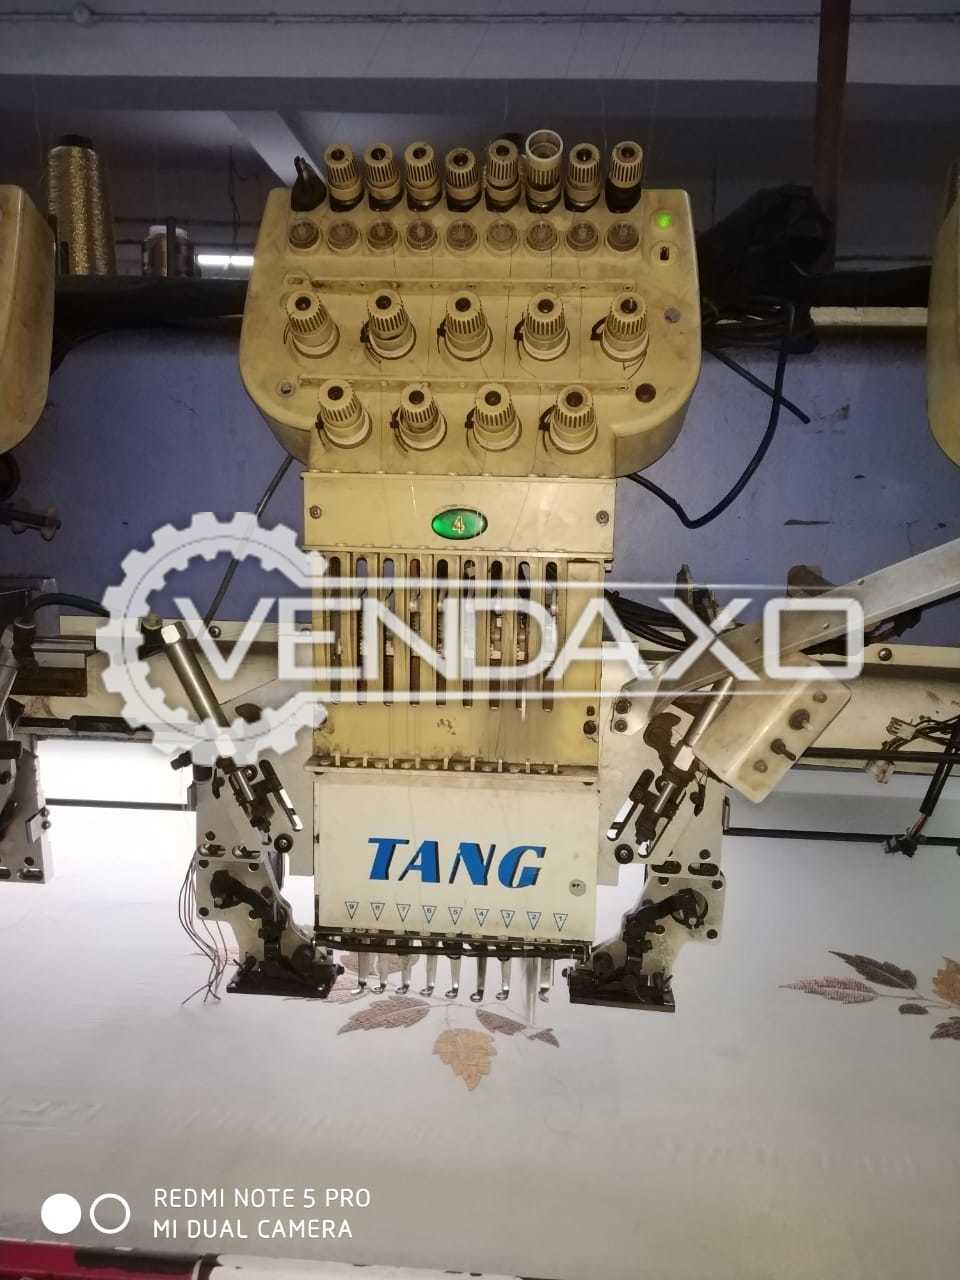 TANG Computerized Embroidery Machine - 15 Head, 6 Color